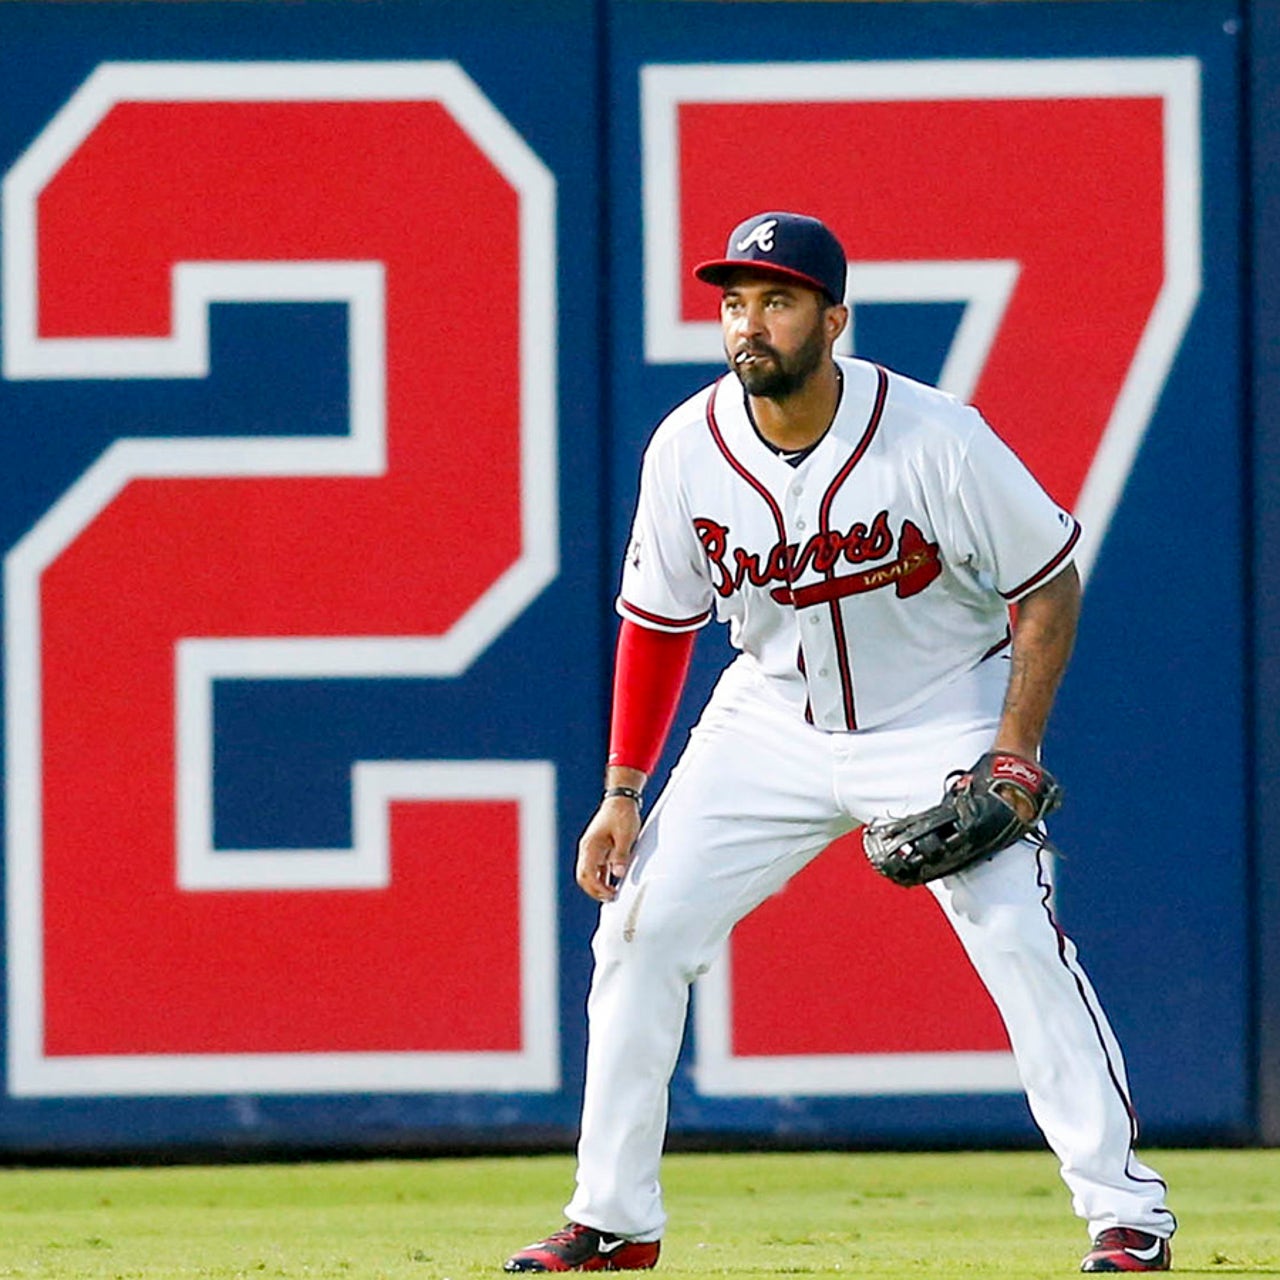 Matt Kemp sets sights on Braves' future: 'Let people know we're coming